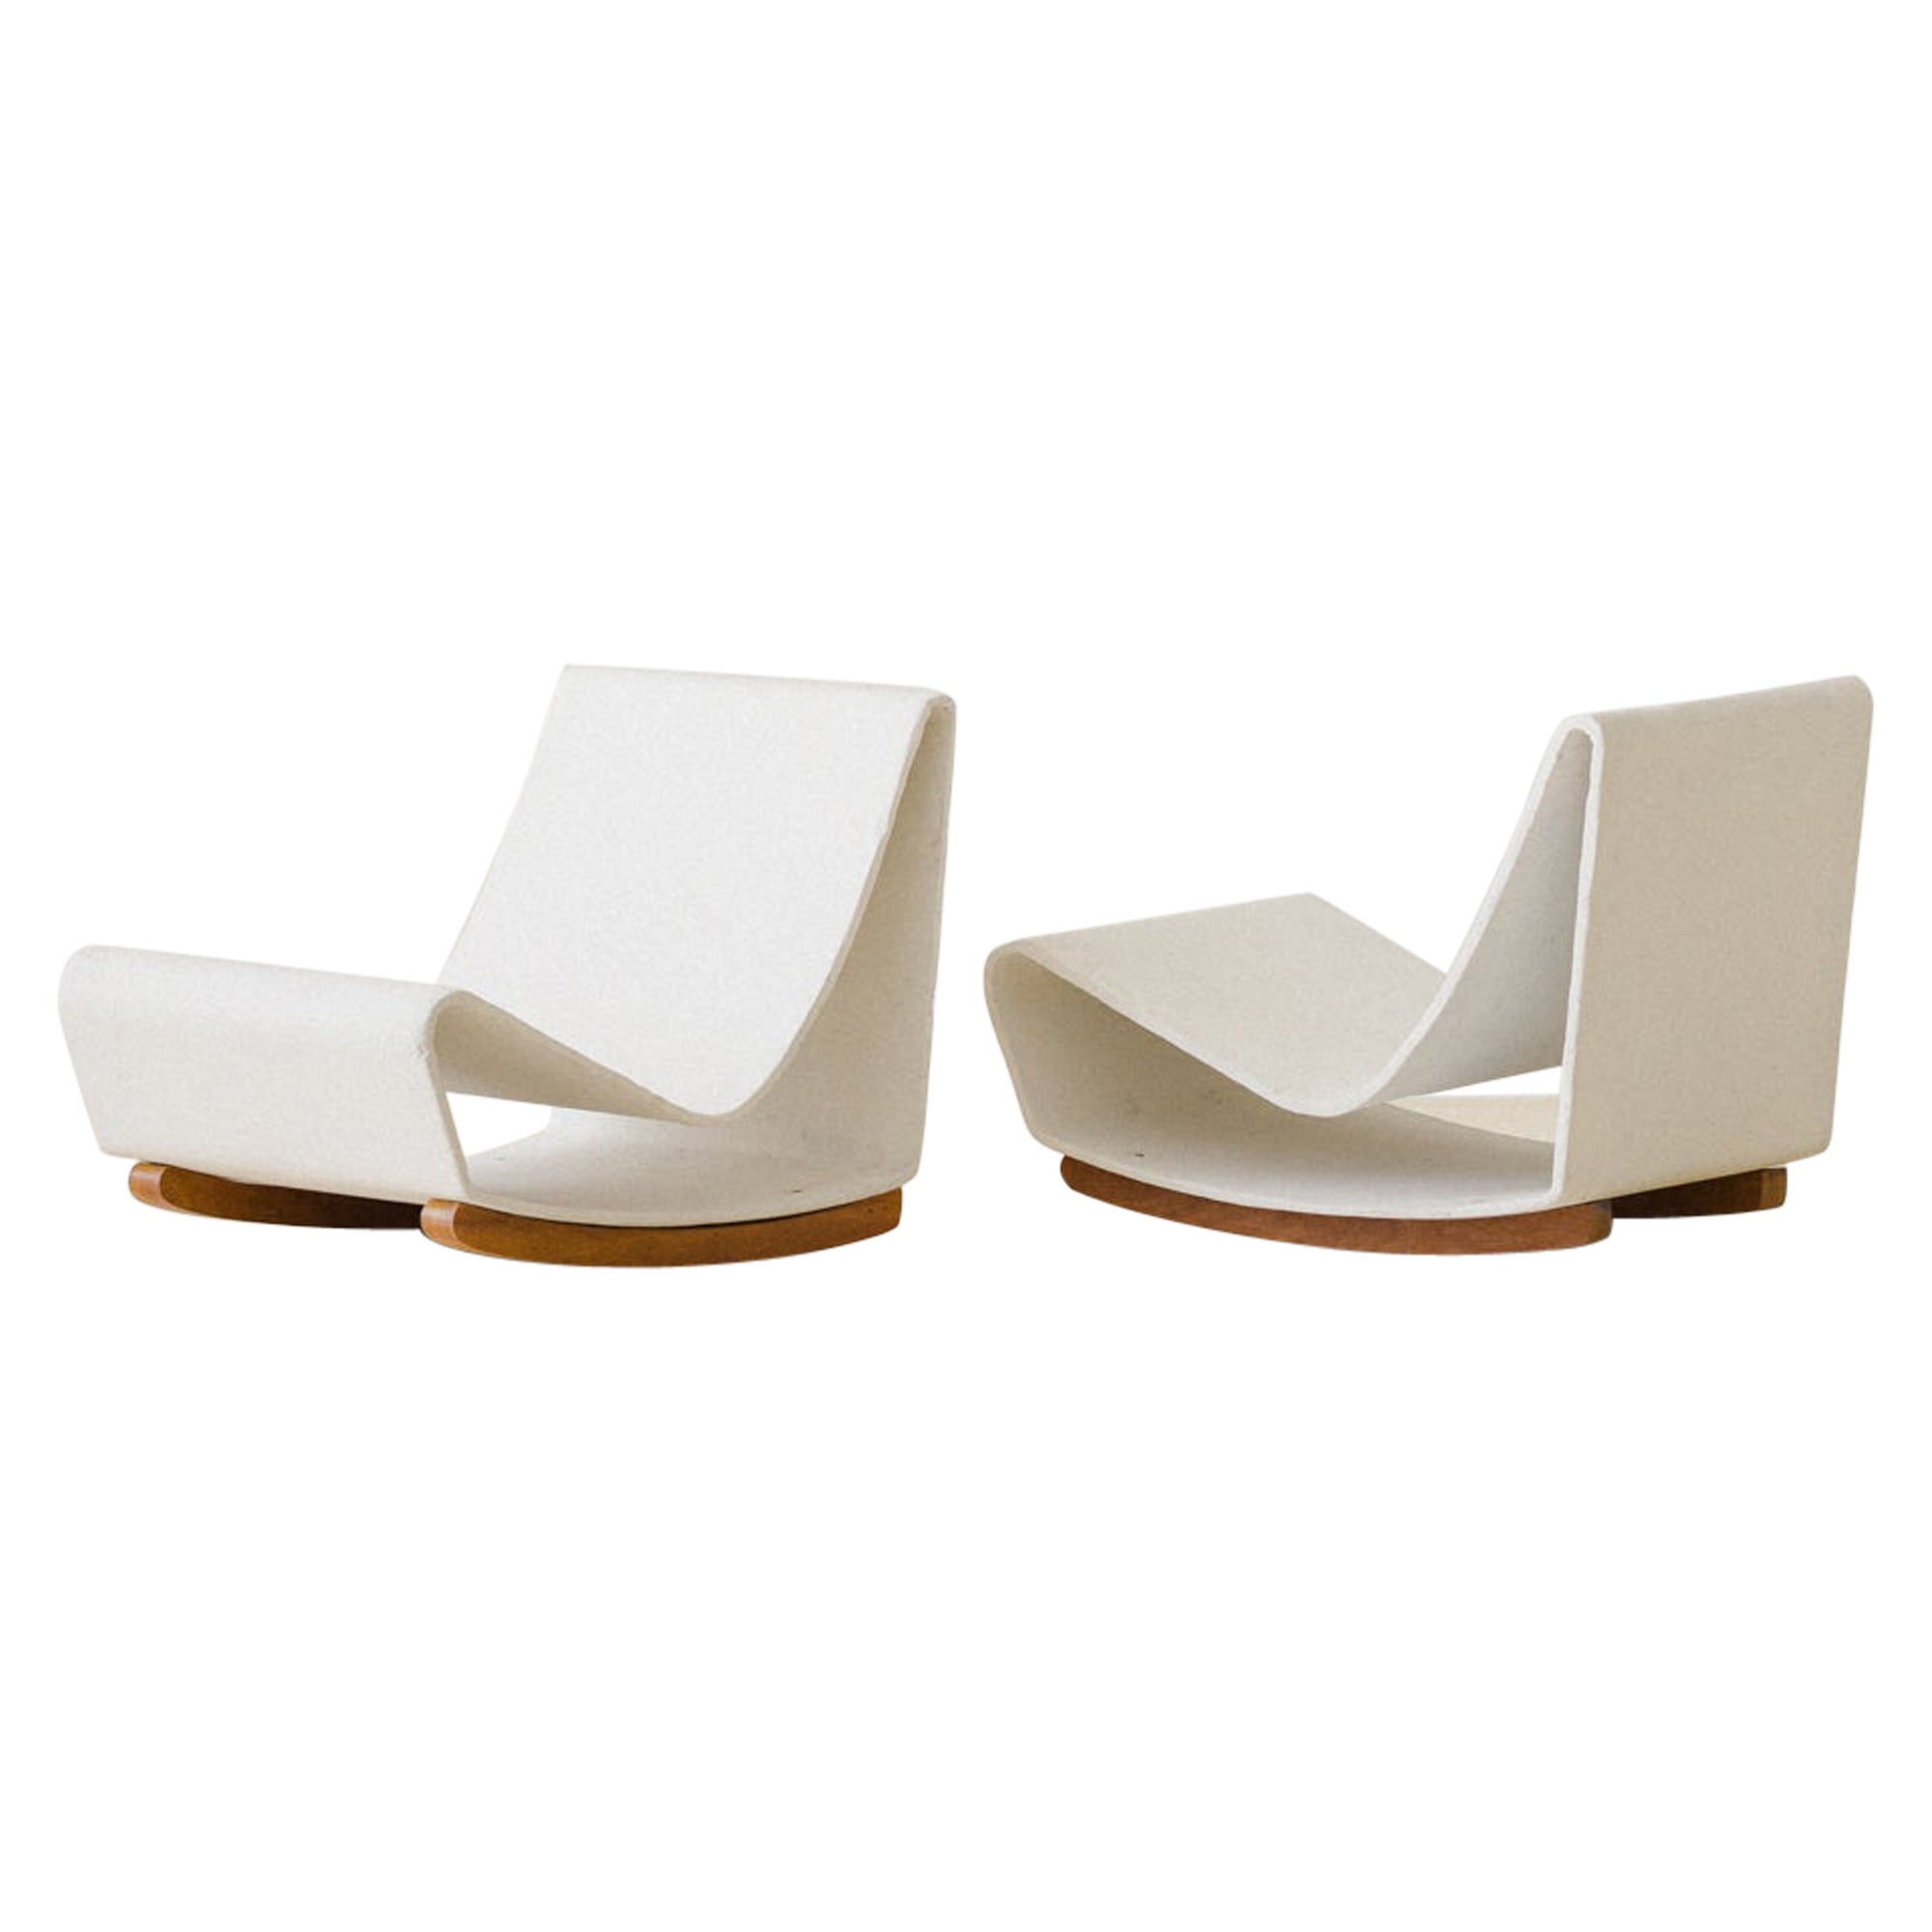 Pair of "Loop Chairs" by Willy Guhl, Produced by Eternit Brazil, 1960s